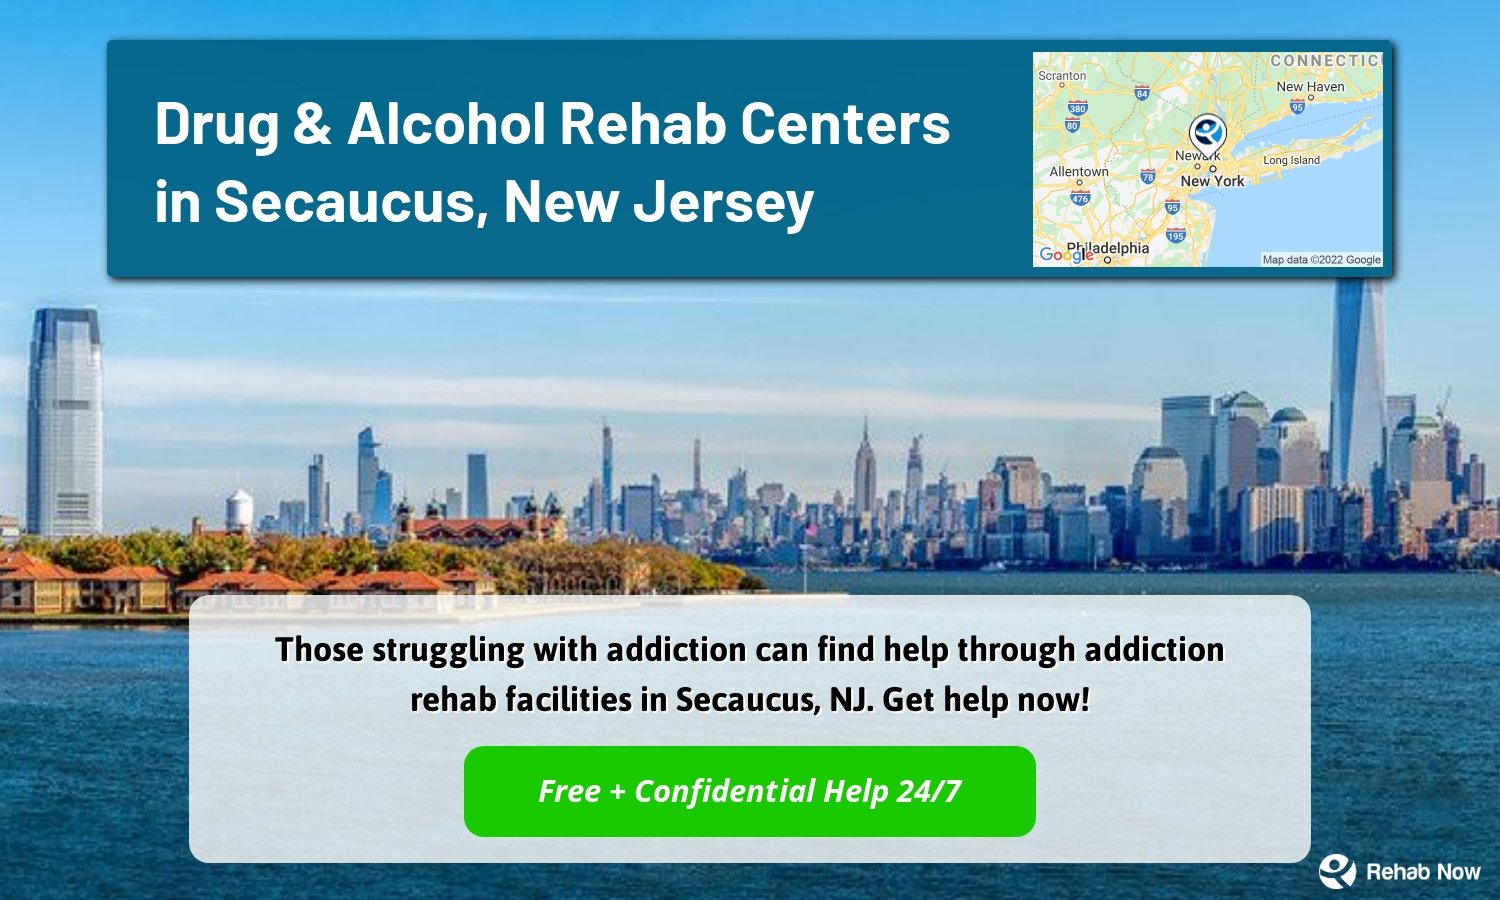 Those struggling with addiction can find help through addiction rehab facilities in Secaucus, NJ. Get help now!